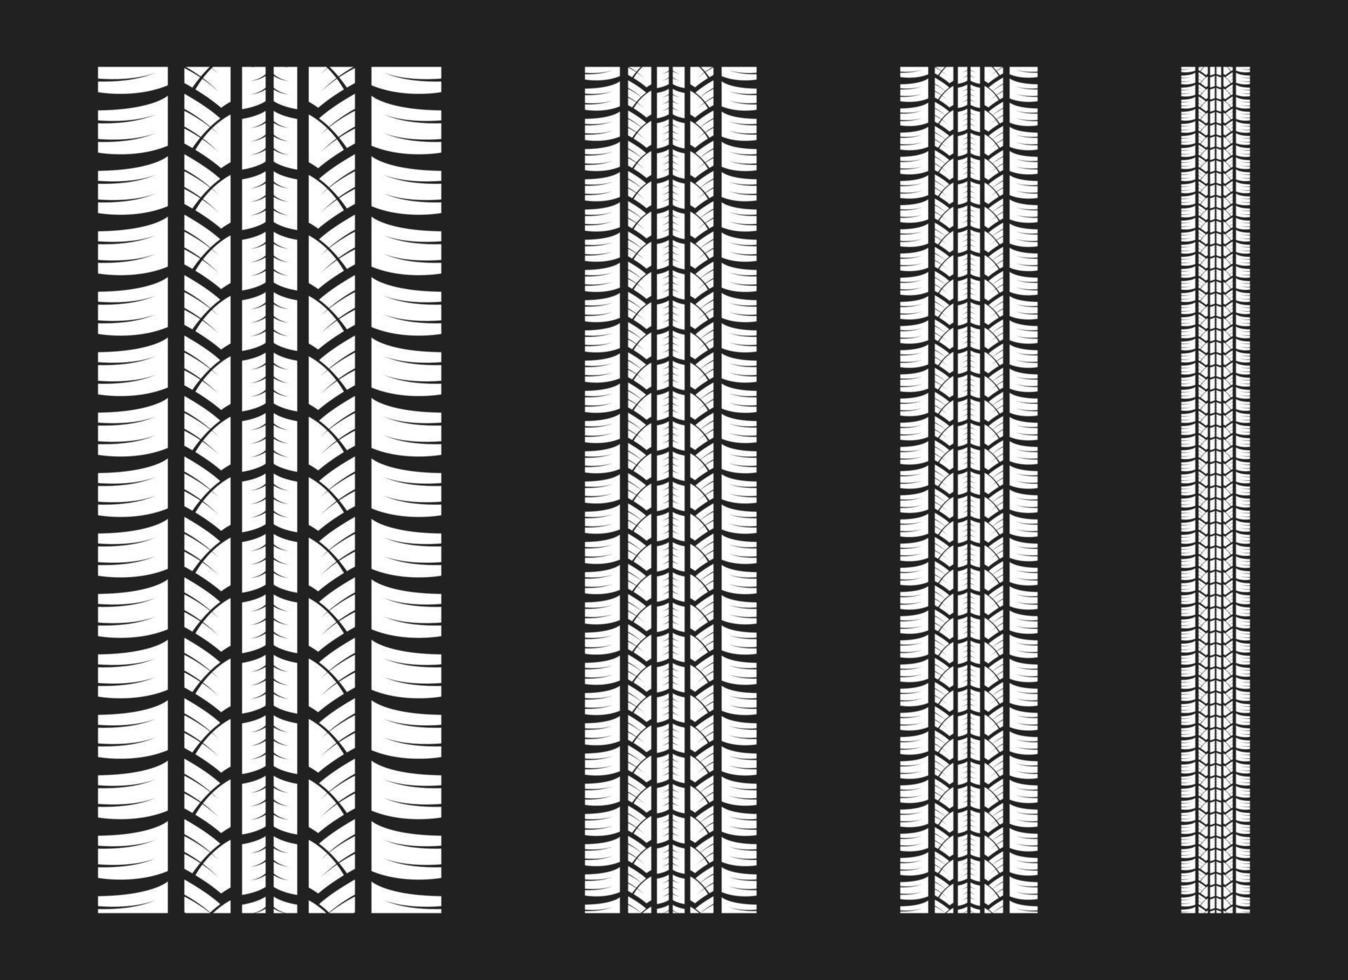 Tire tracks vector design illustration isolated on background